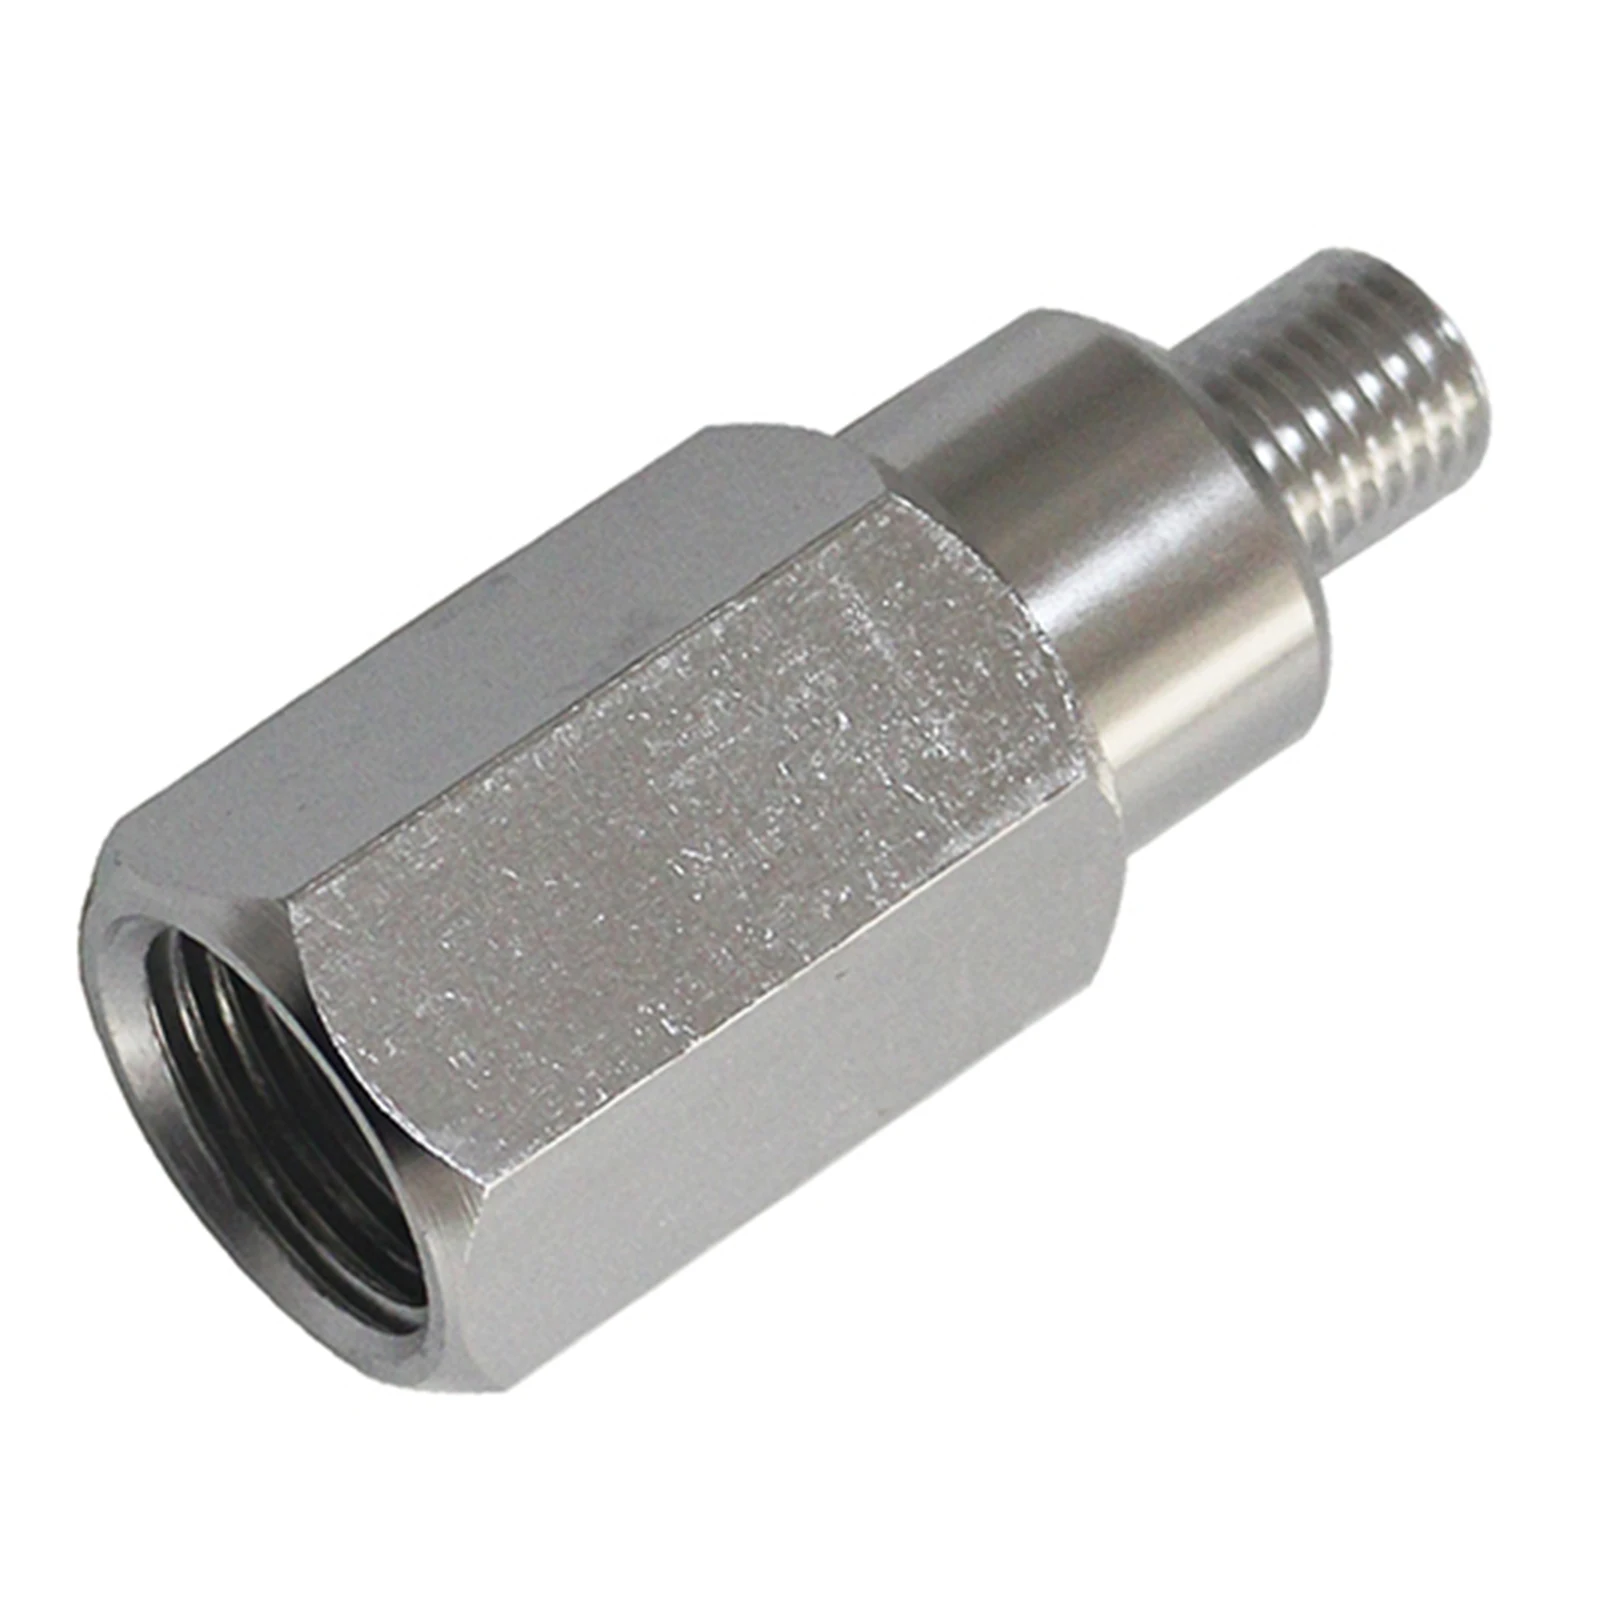 High Performance Swap Coolant Temperature Sensor Adapter M12-1.5 to Female 1/2 NPT for LS1 Engine